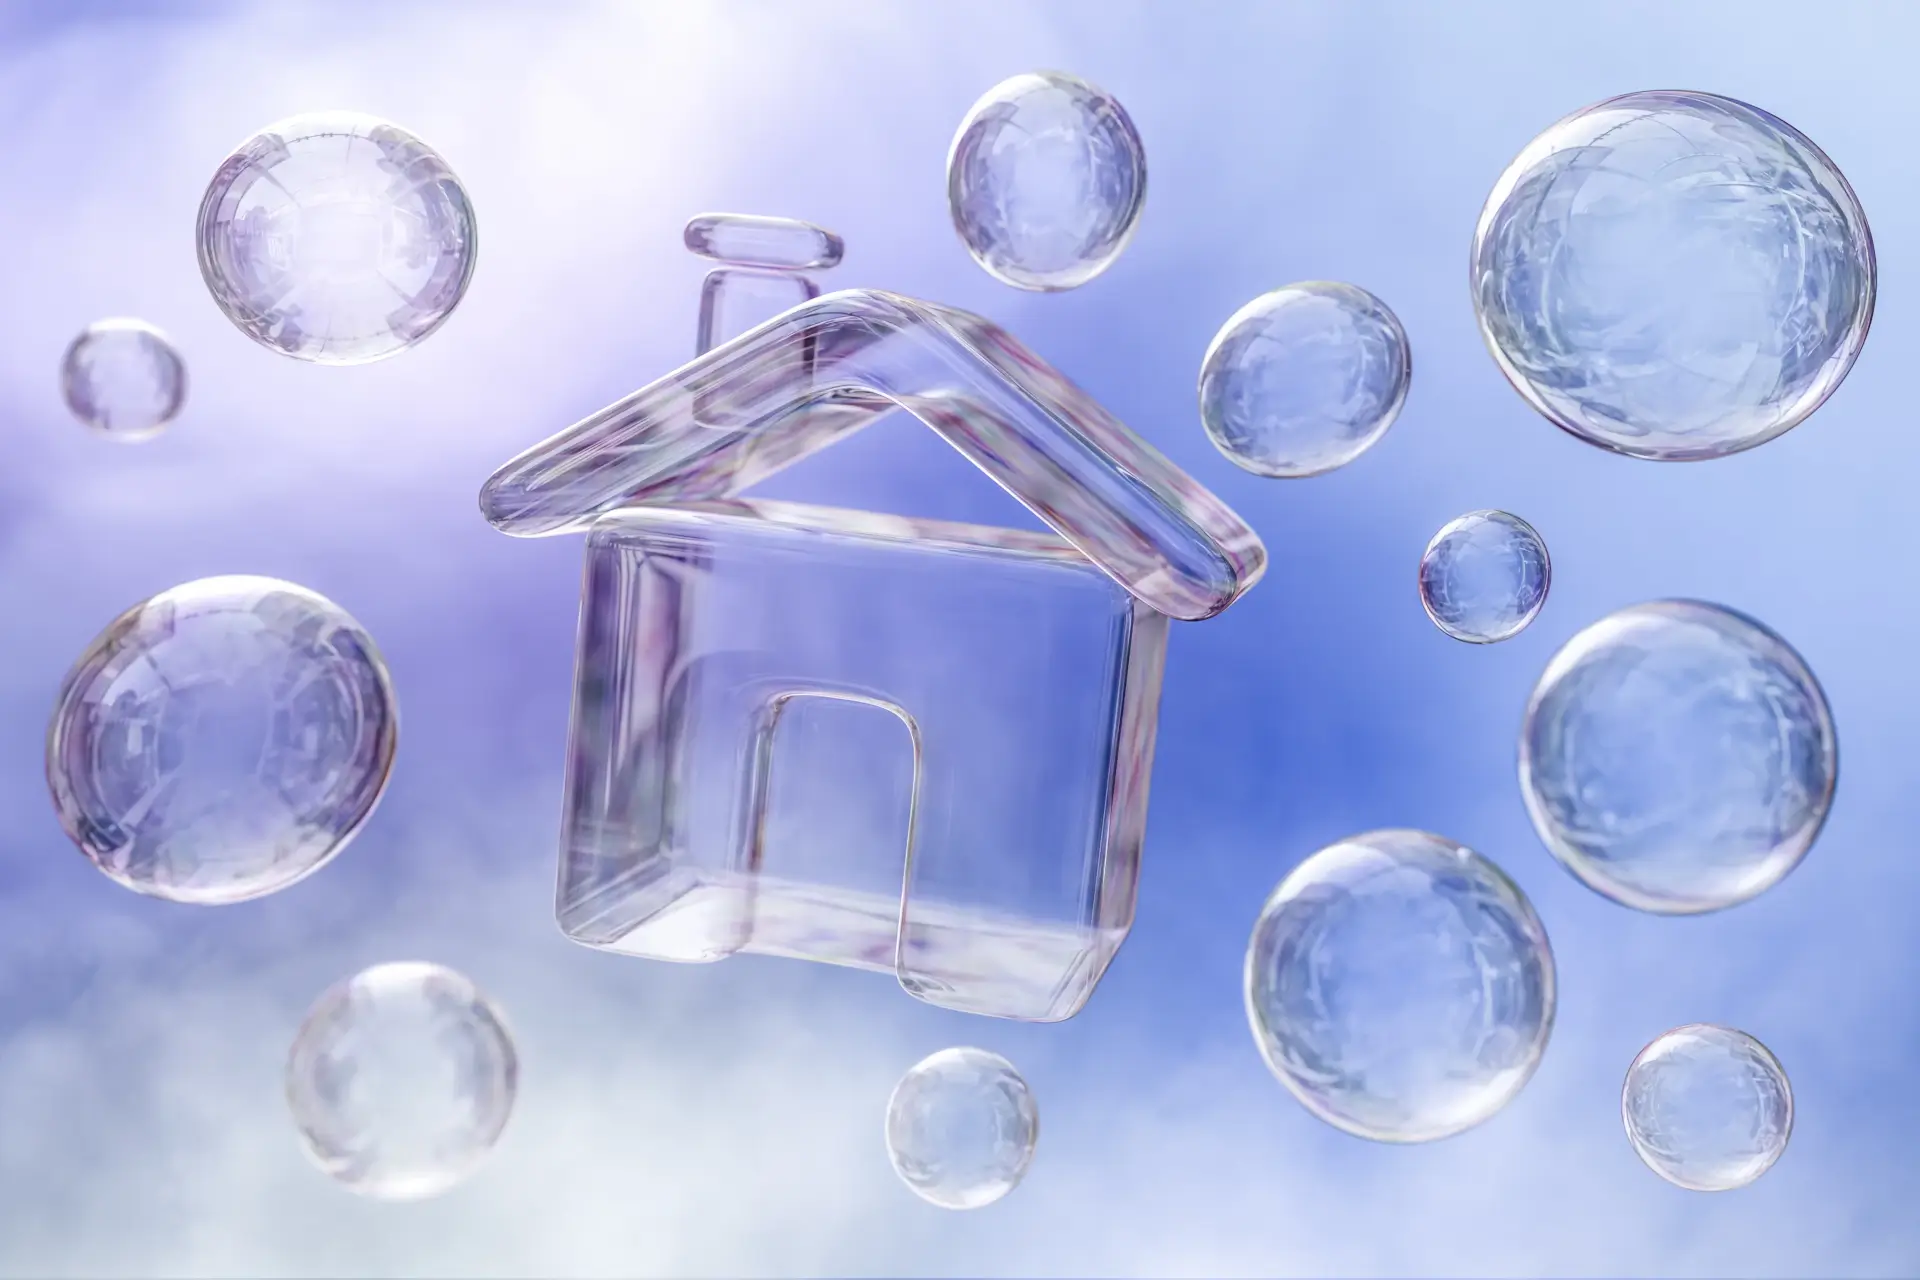 What is a Housing Bubble and are We in One?